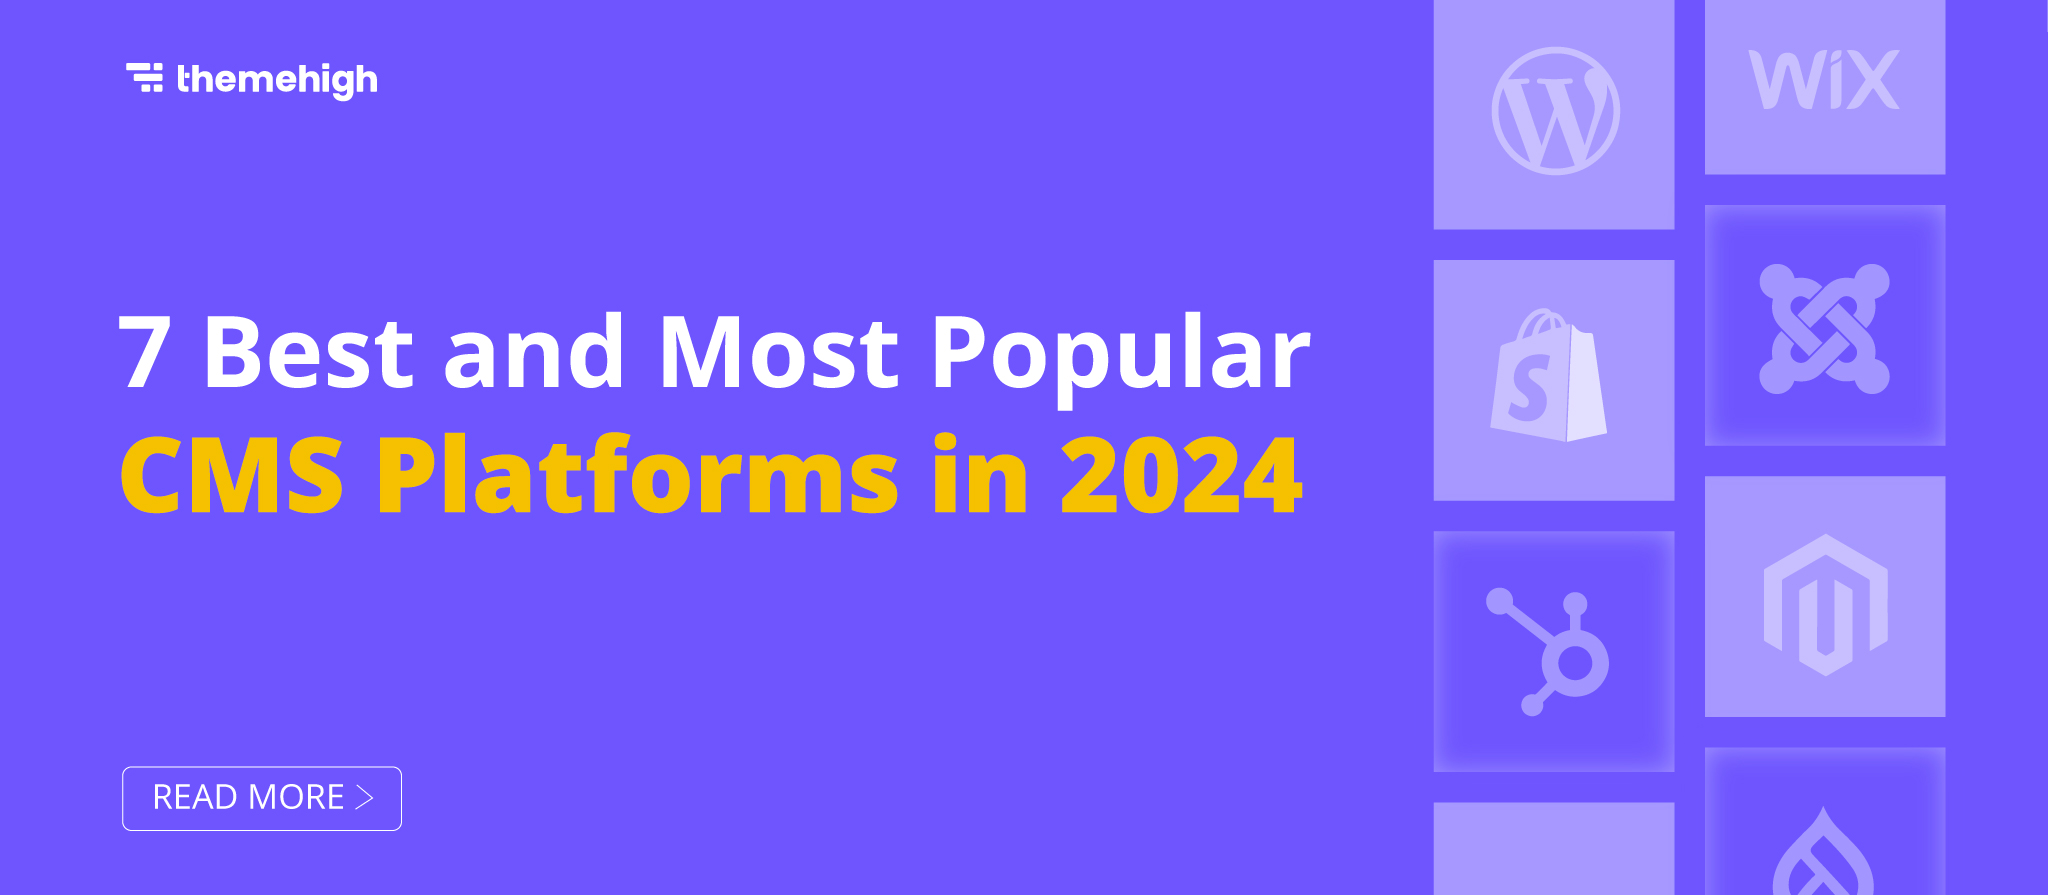 7 best and most popular CMS platforms for 2024